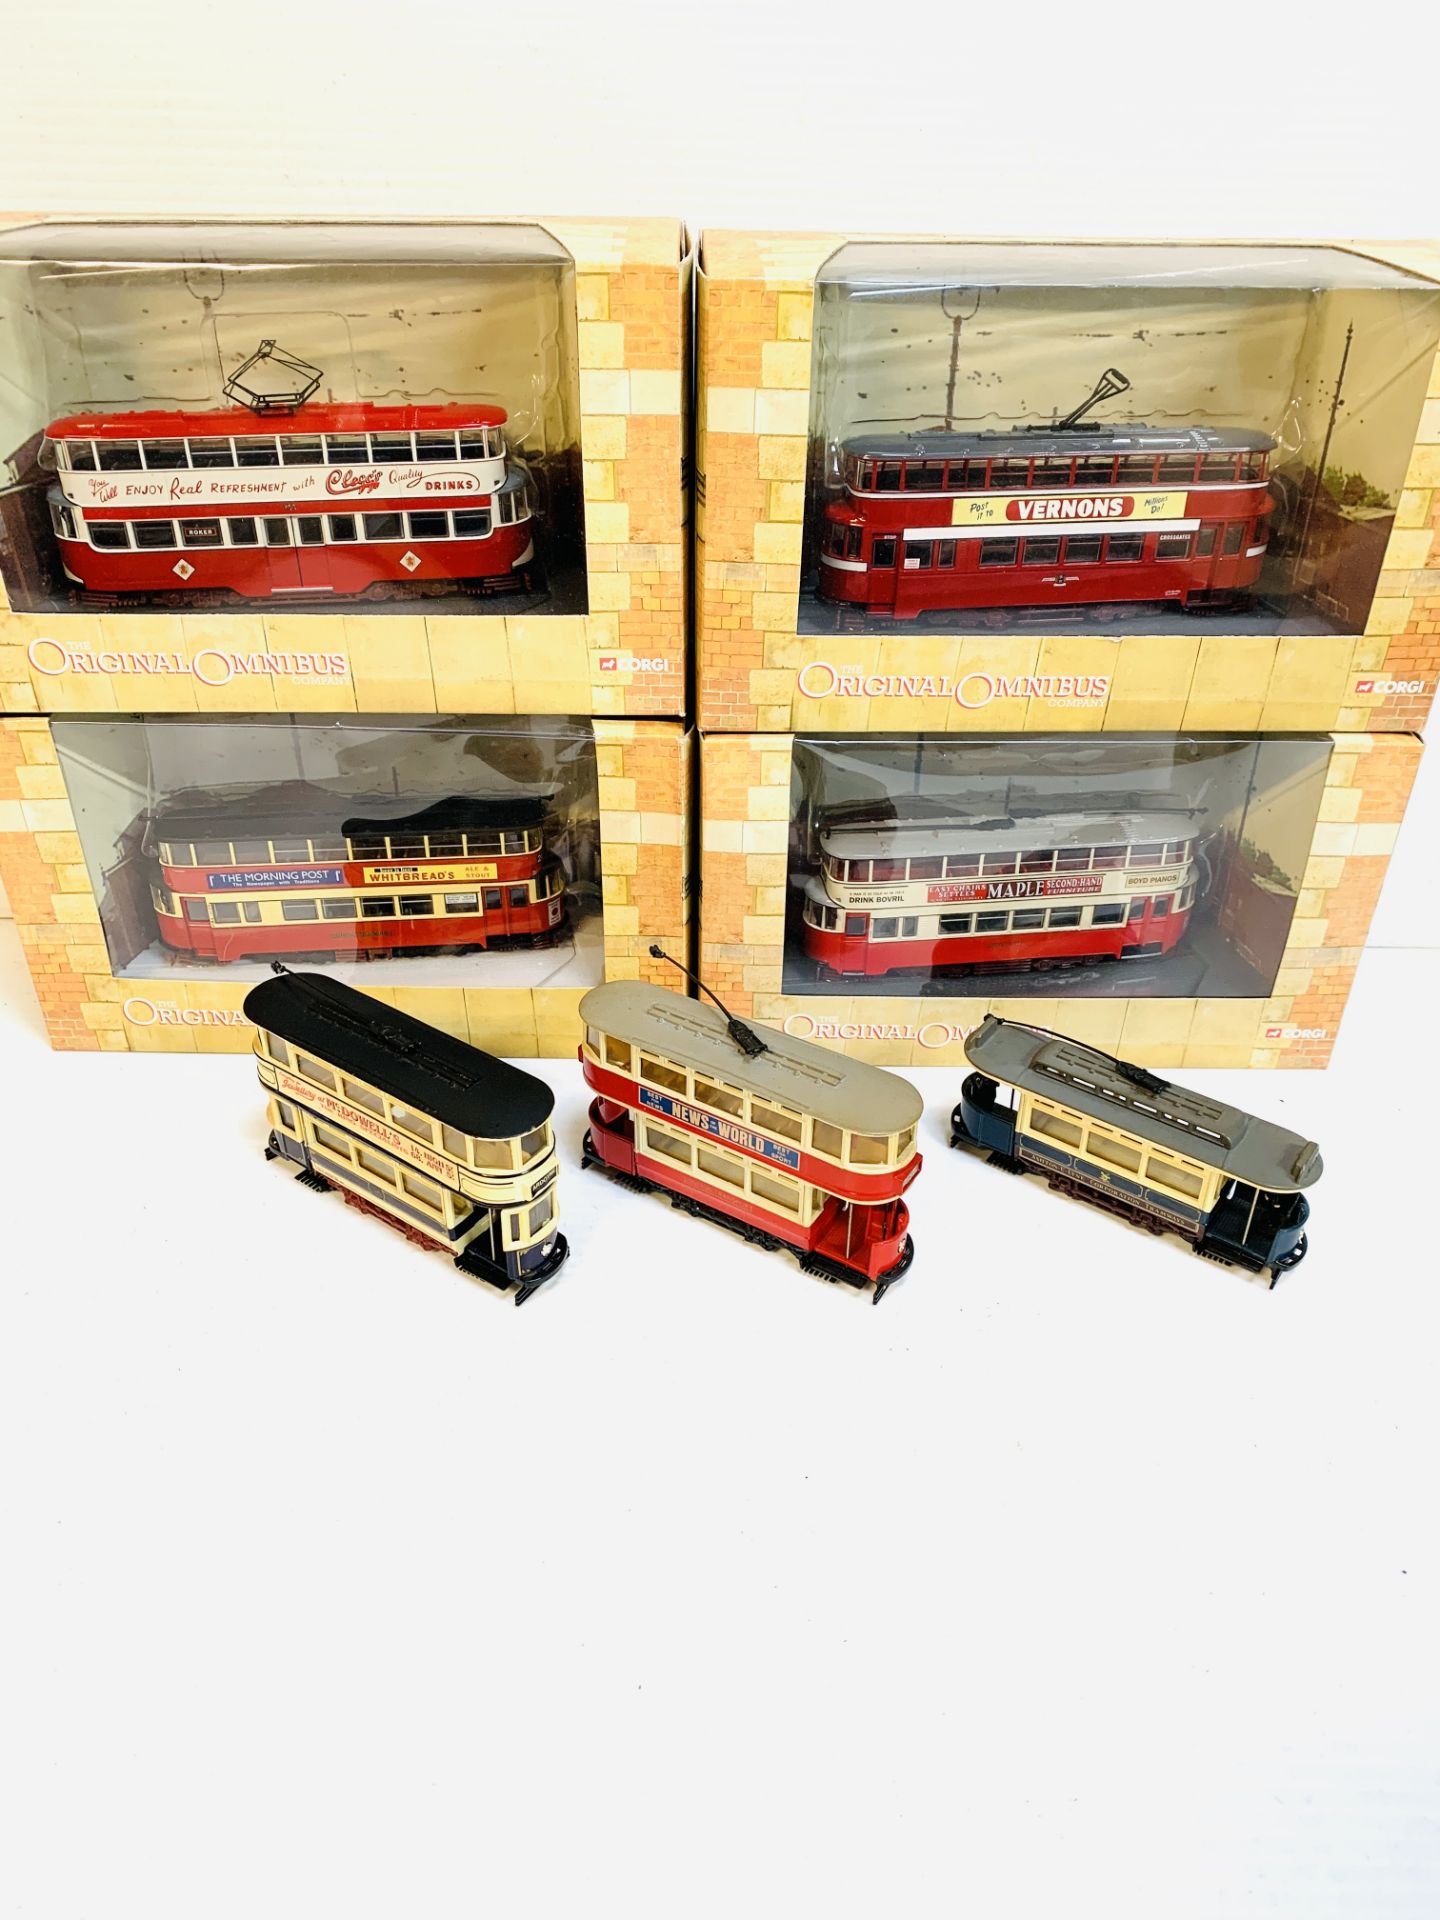 Collection of diecast Corgi model trams and omnibuses.